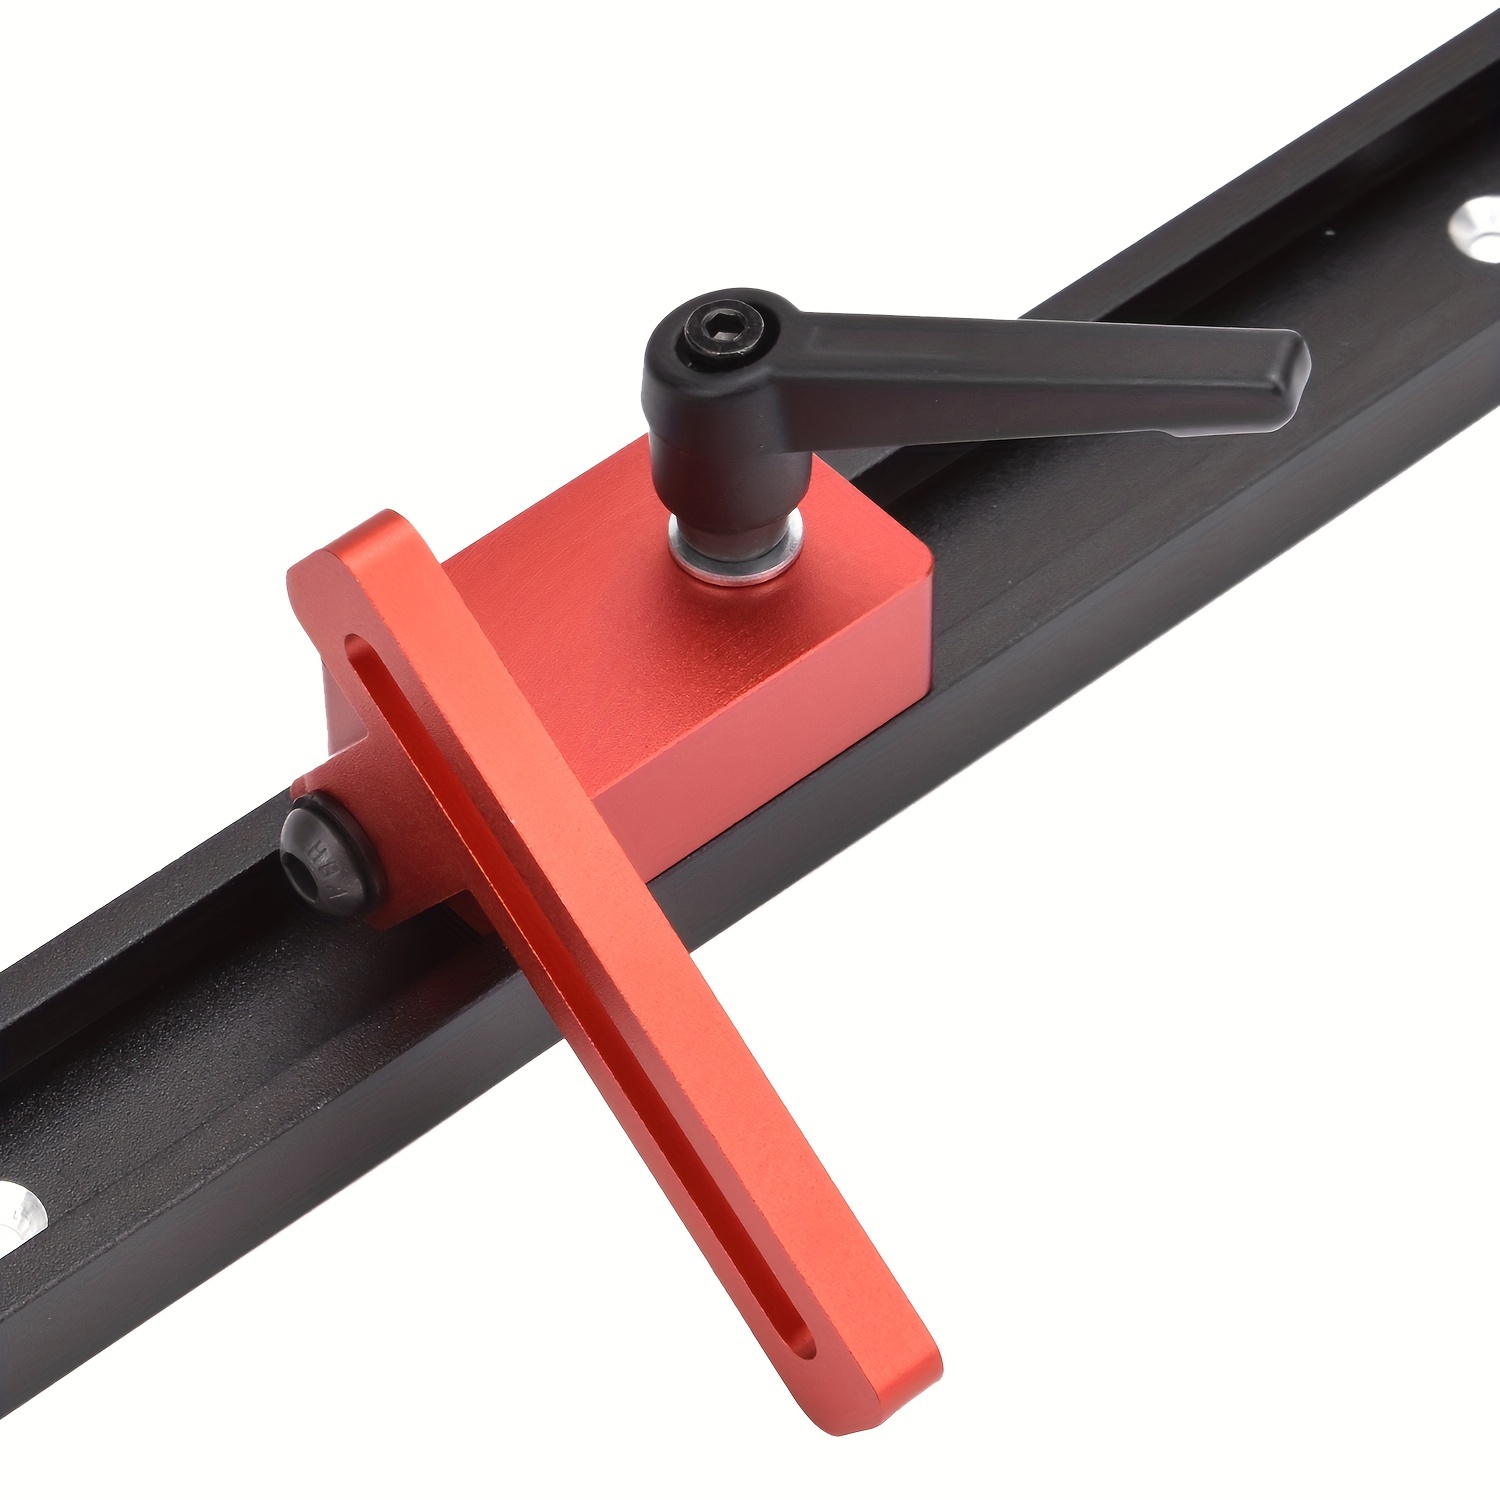 Upgrade Your Woodworking Projects with this 30mm T-Track Miter Stop Tool!